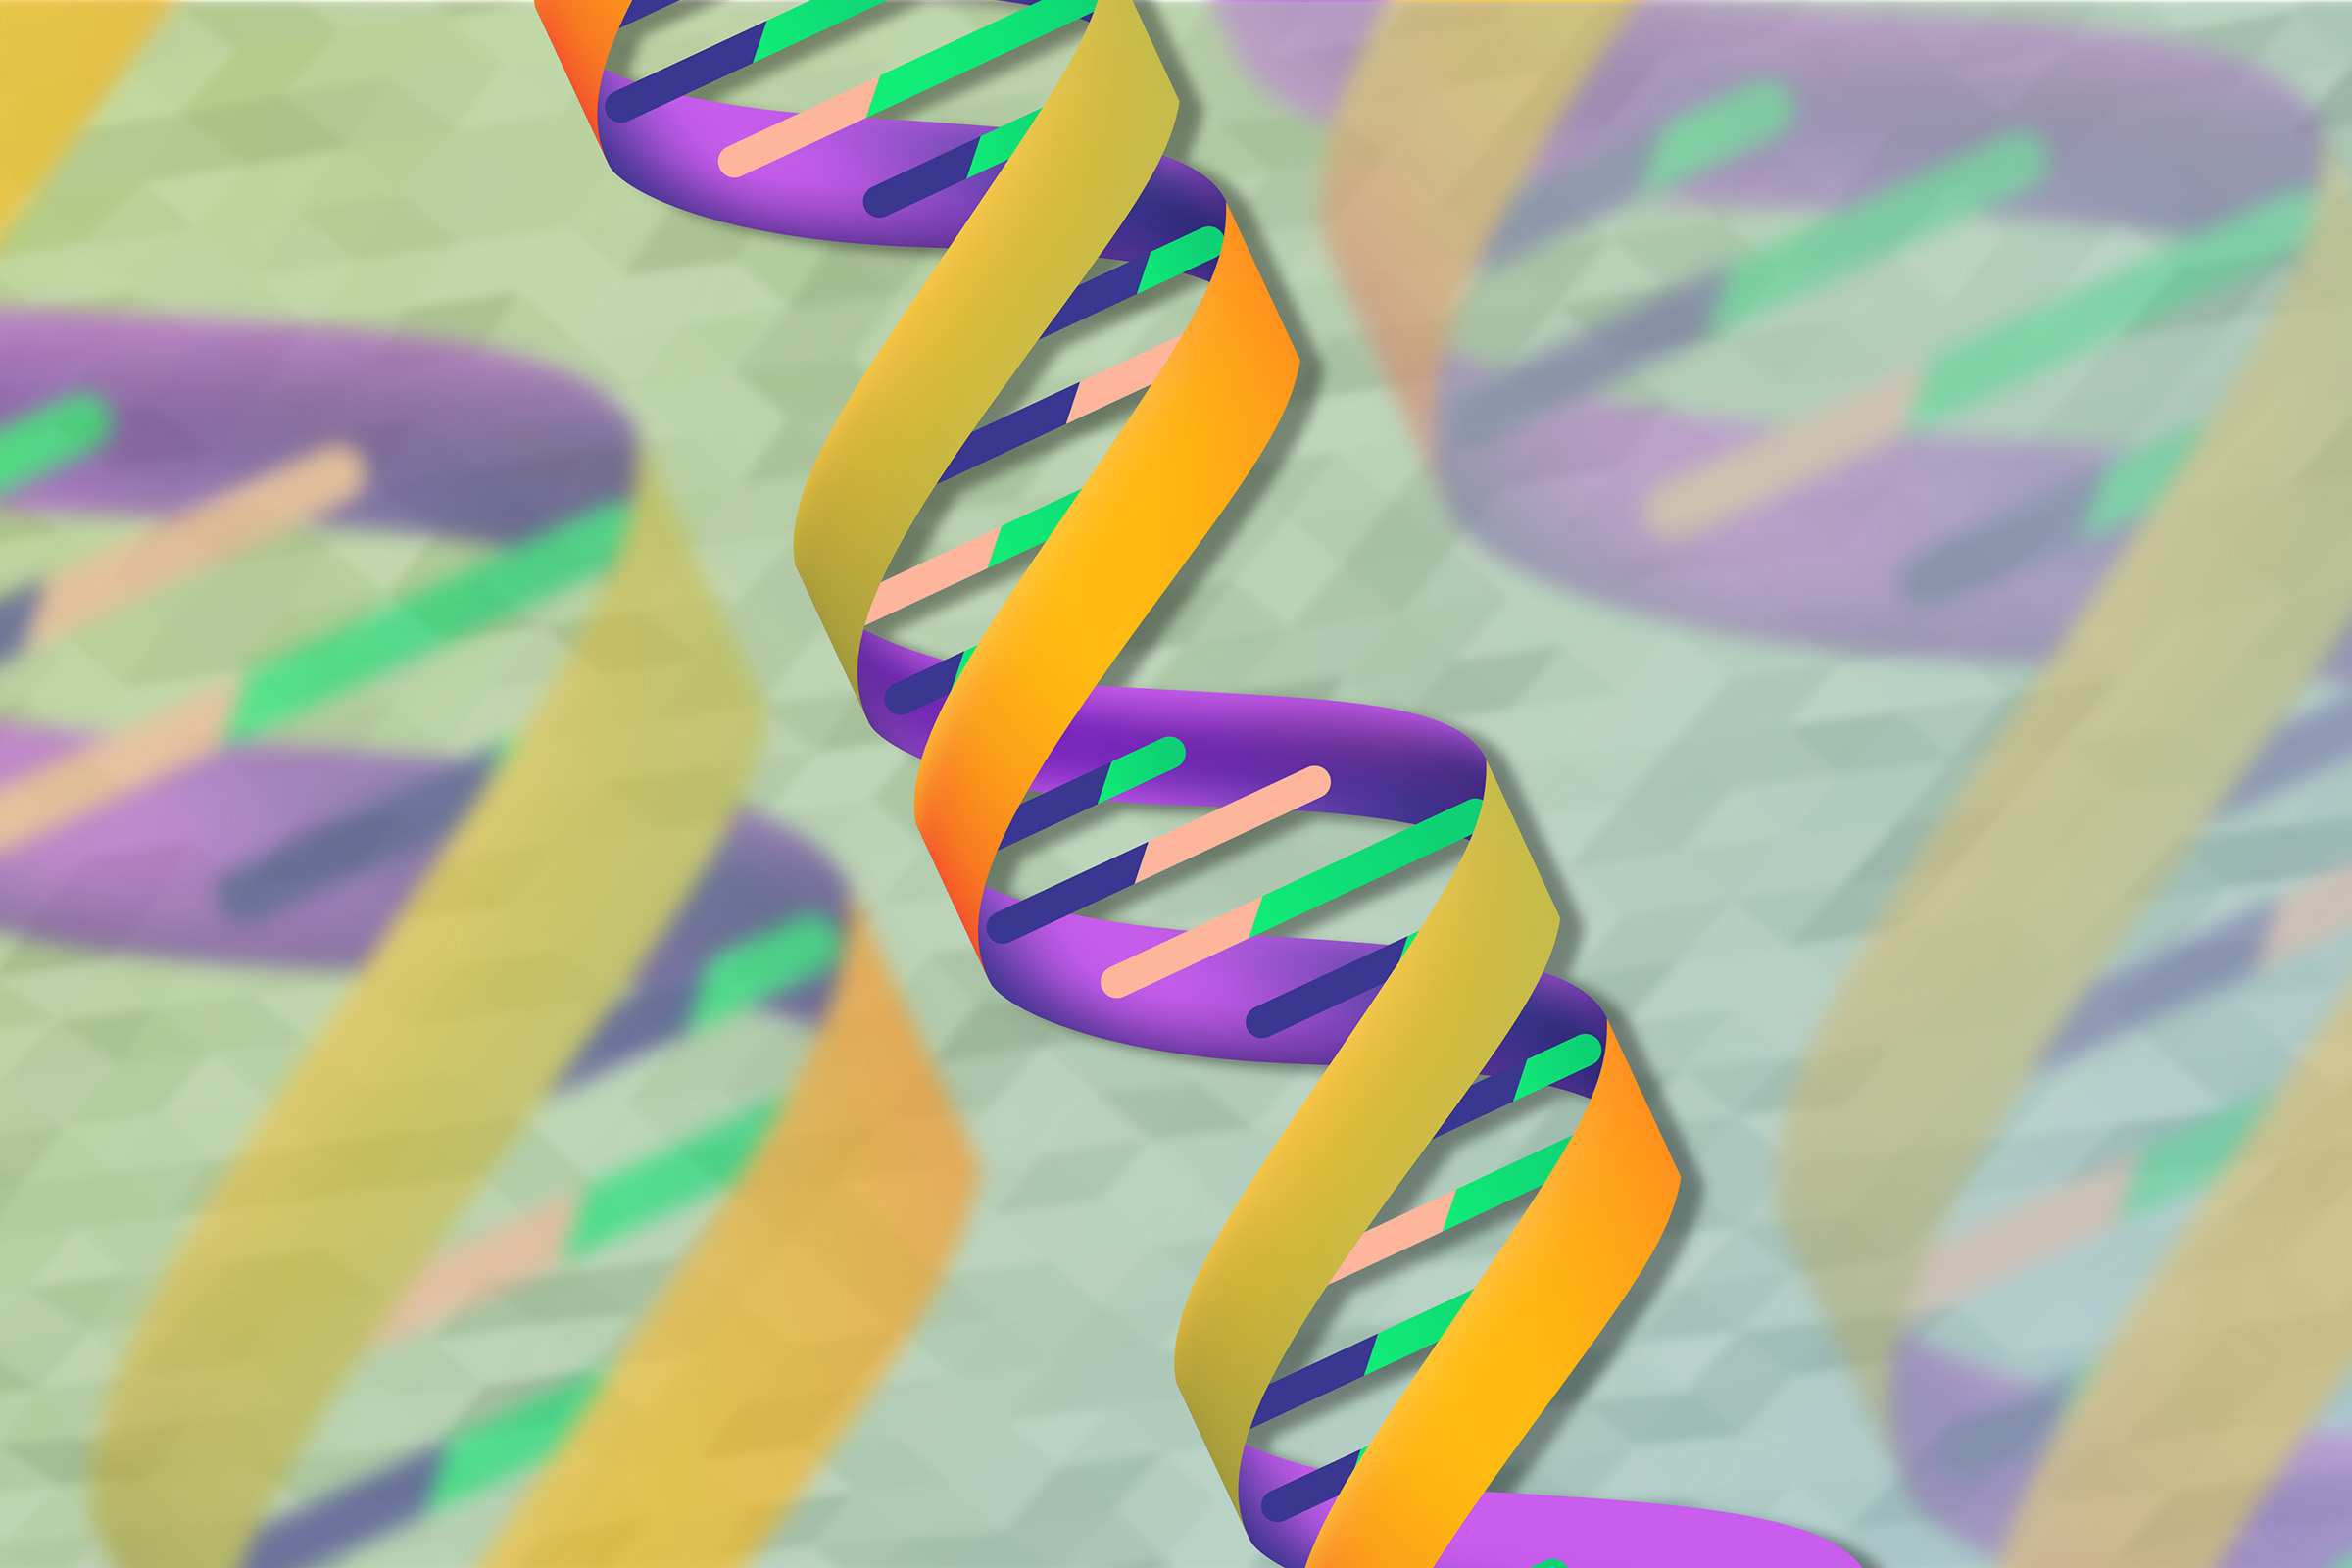 Illustration of a DNA helix in different colors